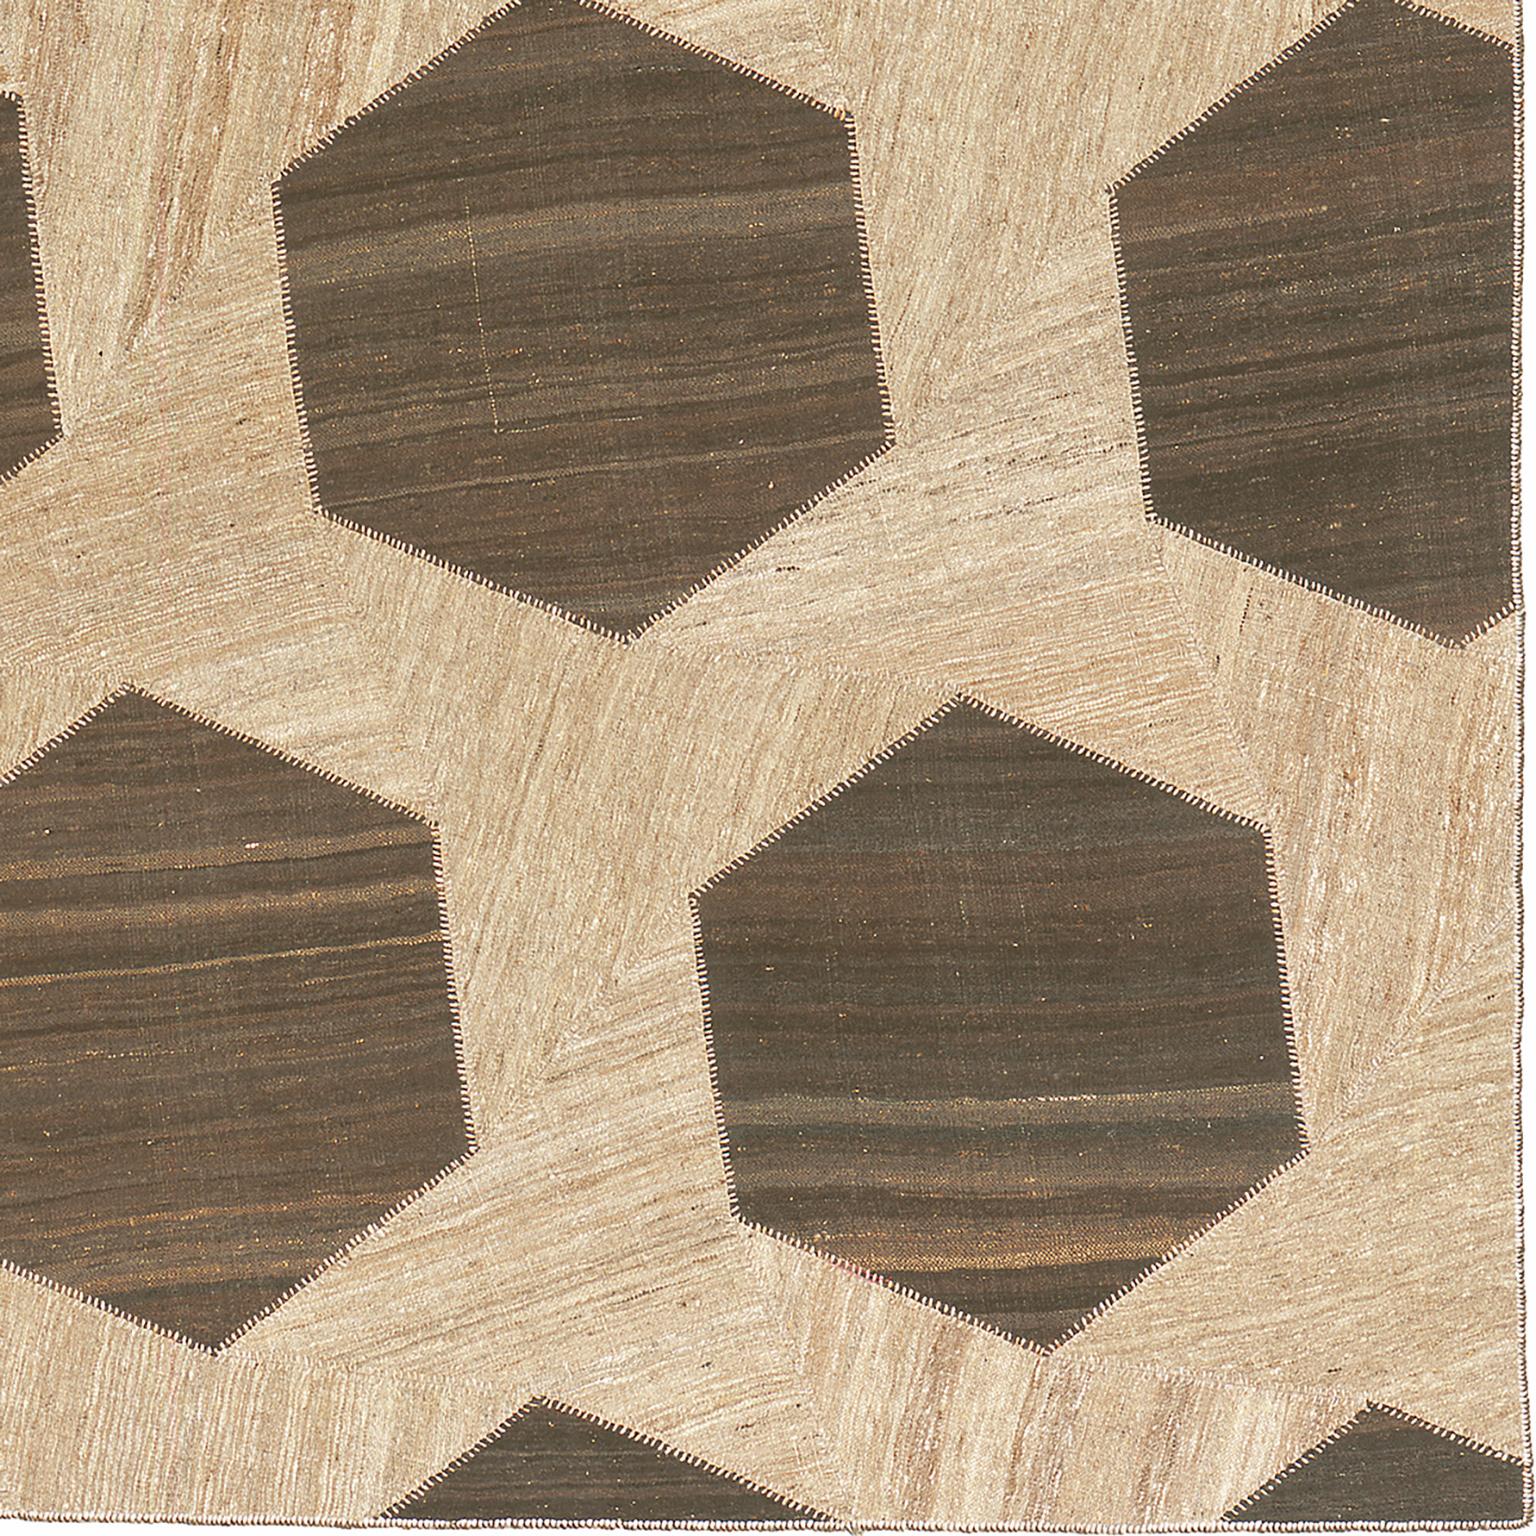 Spinning Star Design using 1940's Persian beige and brown panels.
 